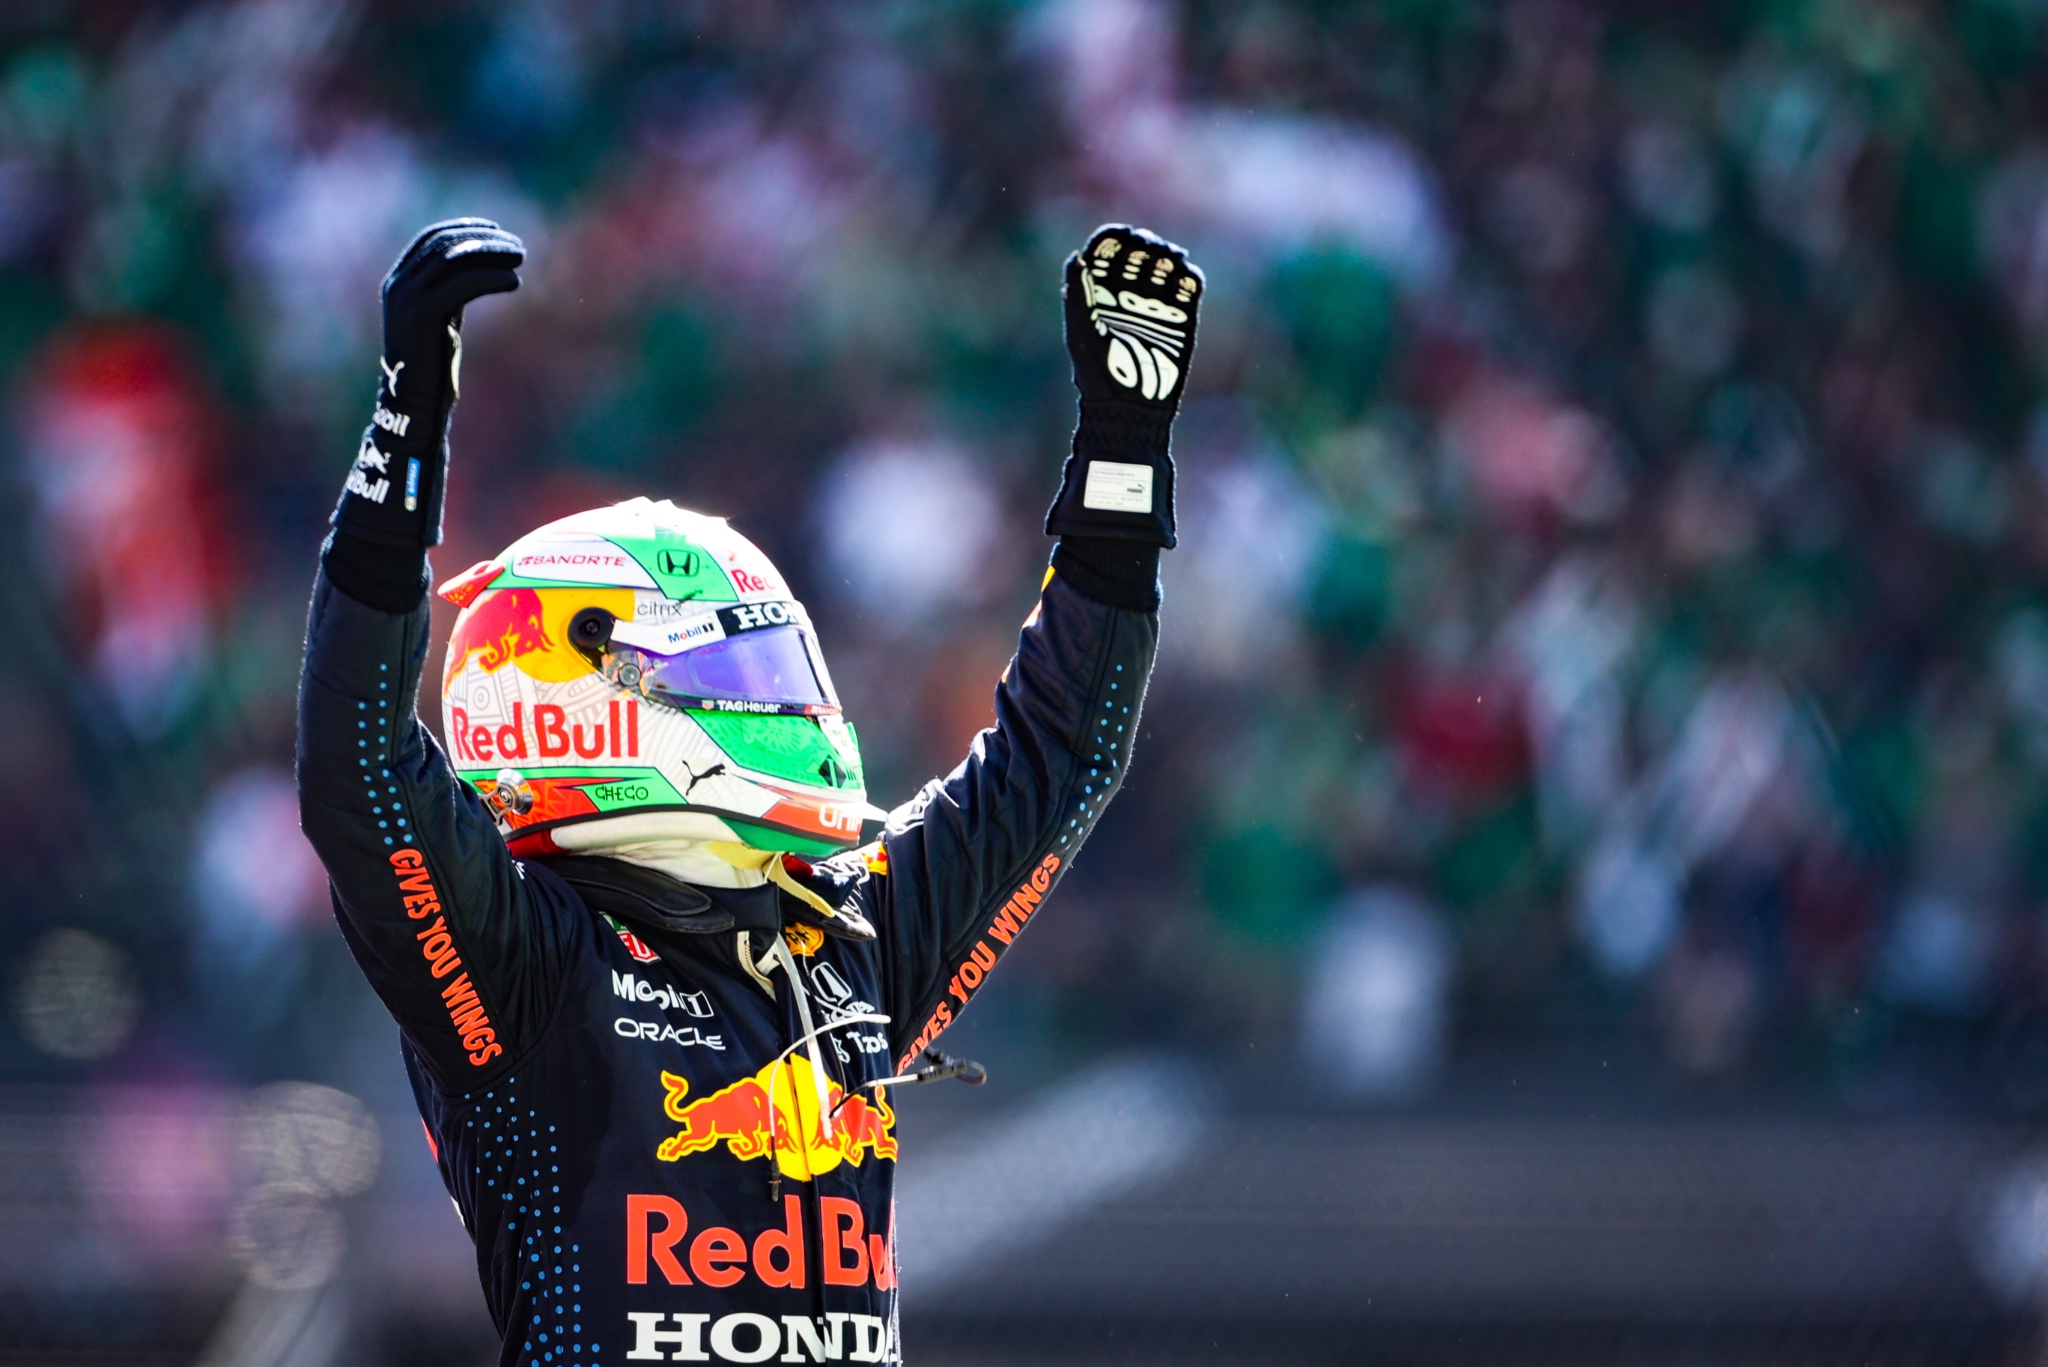 Sergio Perez (MEX) Red Bull Racing celebrates his third position in parc